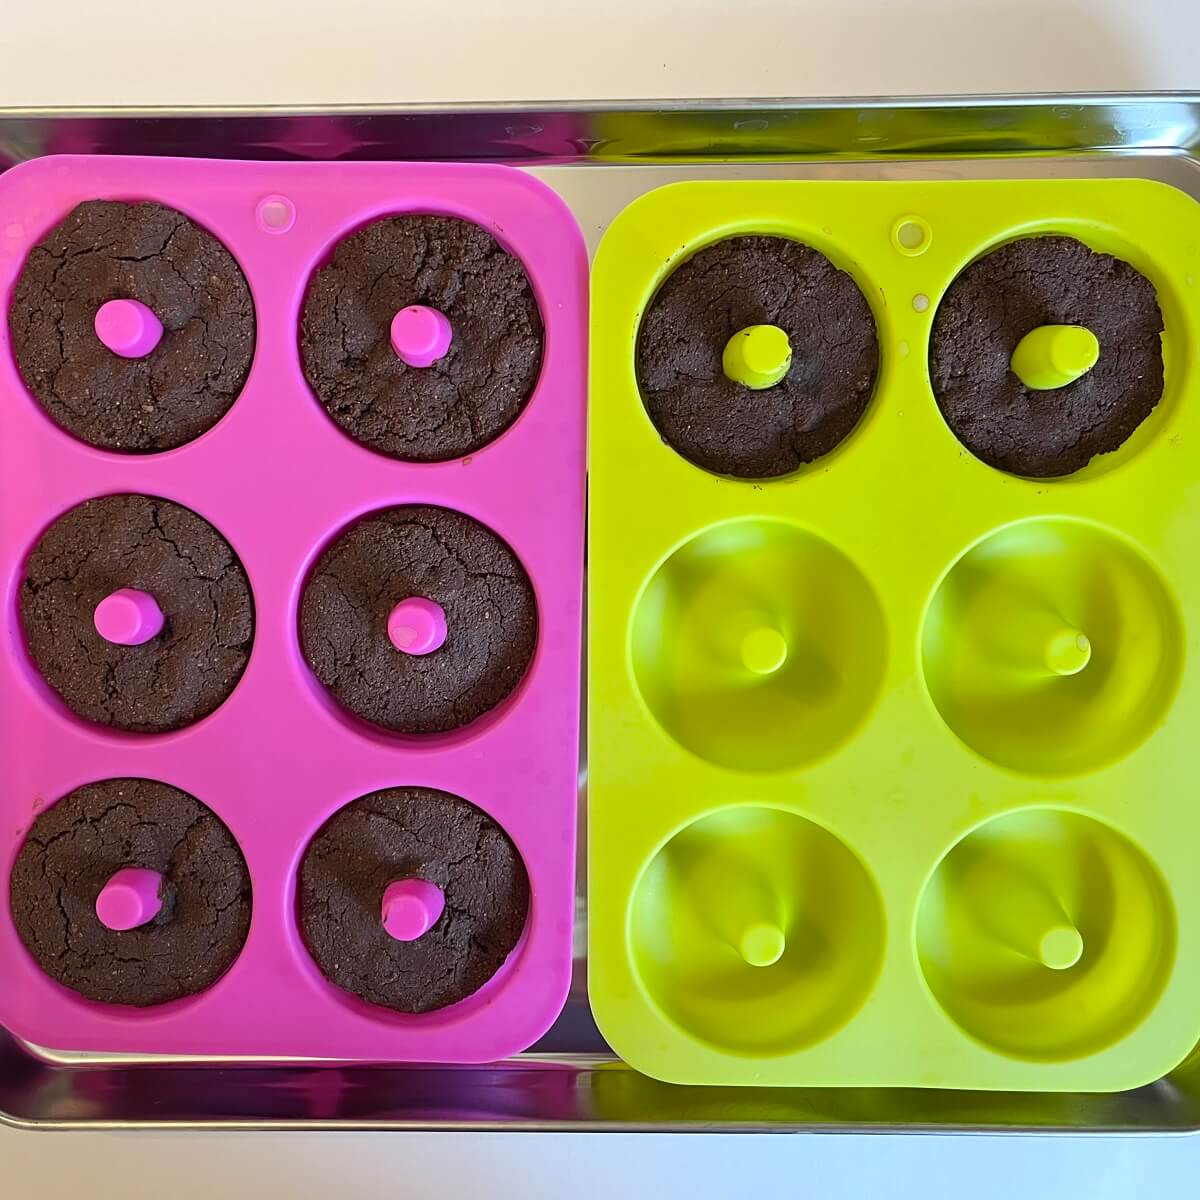 Freshly baked chocolate donuts in silicone molds.